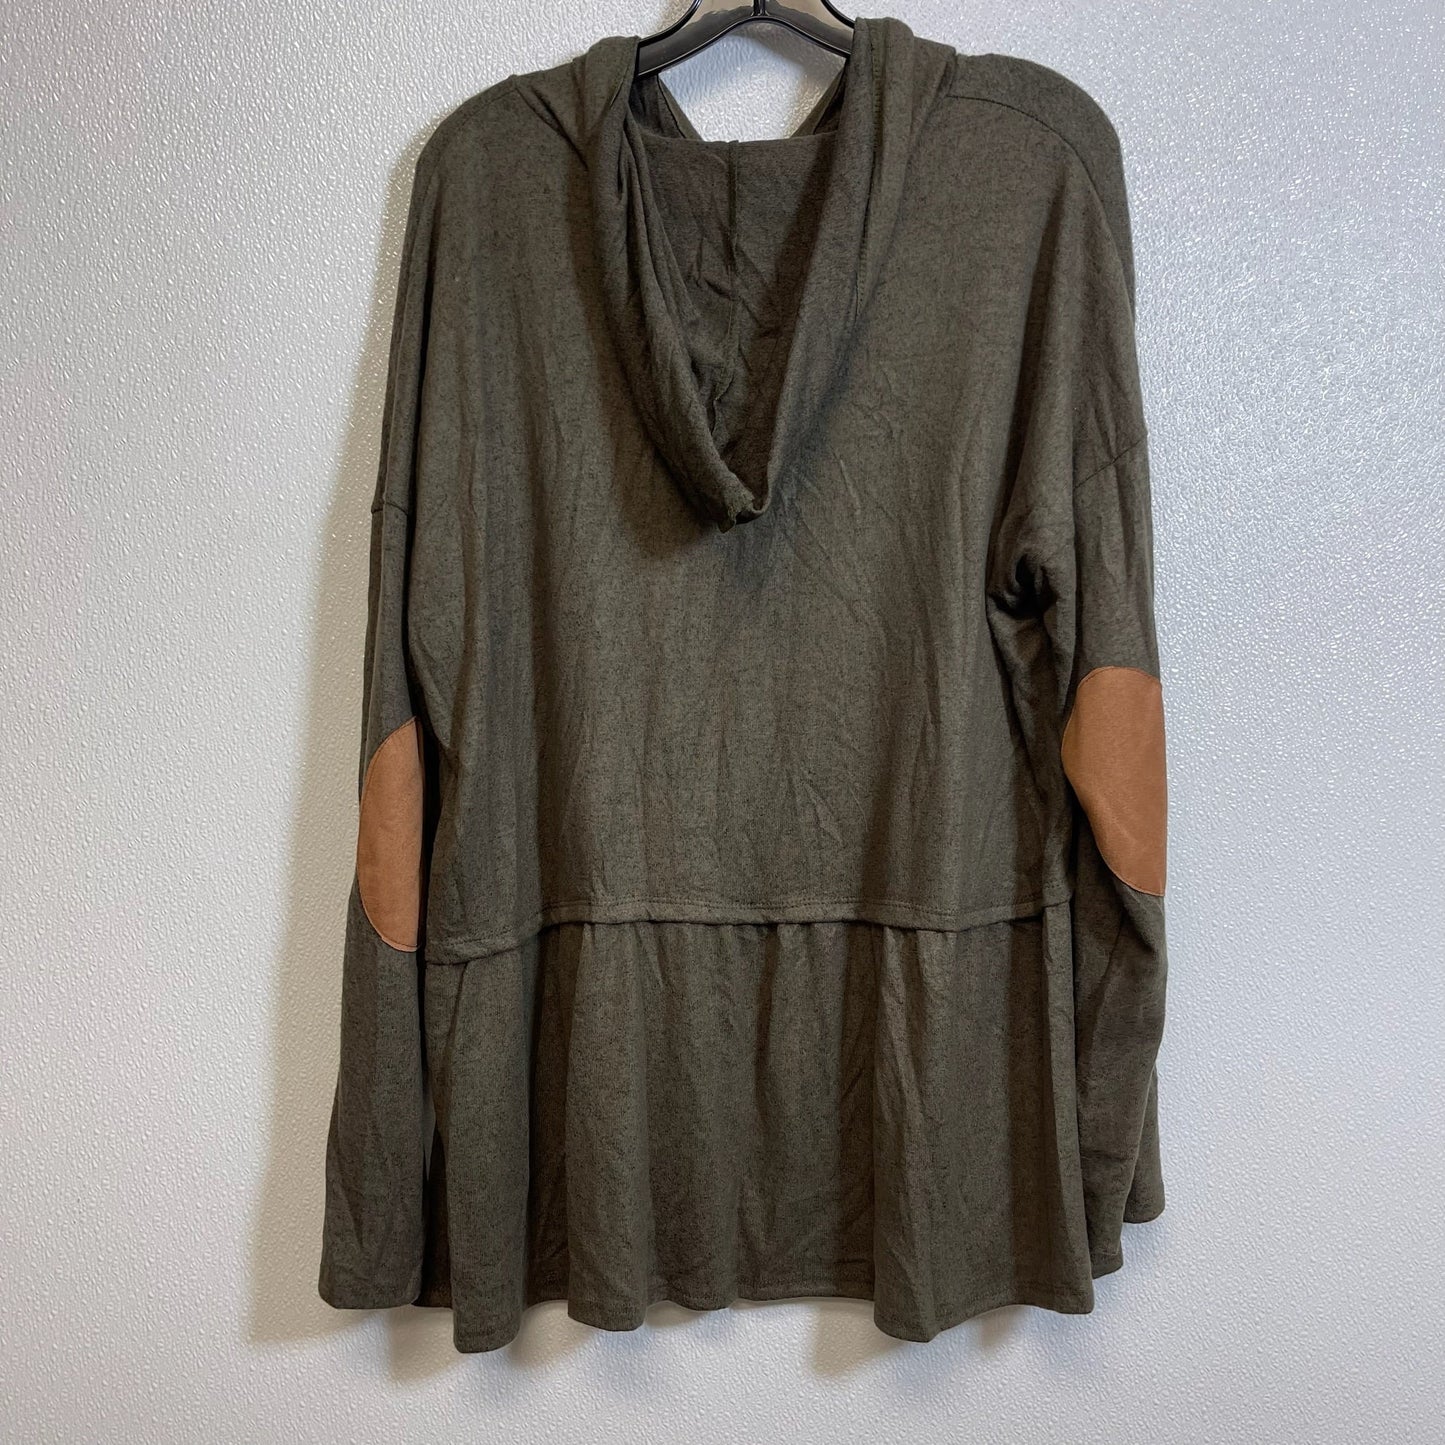 Olive Top Long Sleeve Clothes Mentor, Size 1x